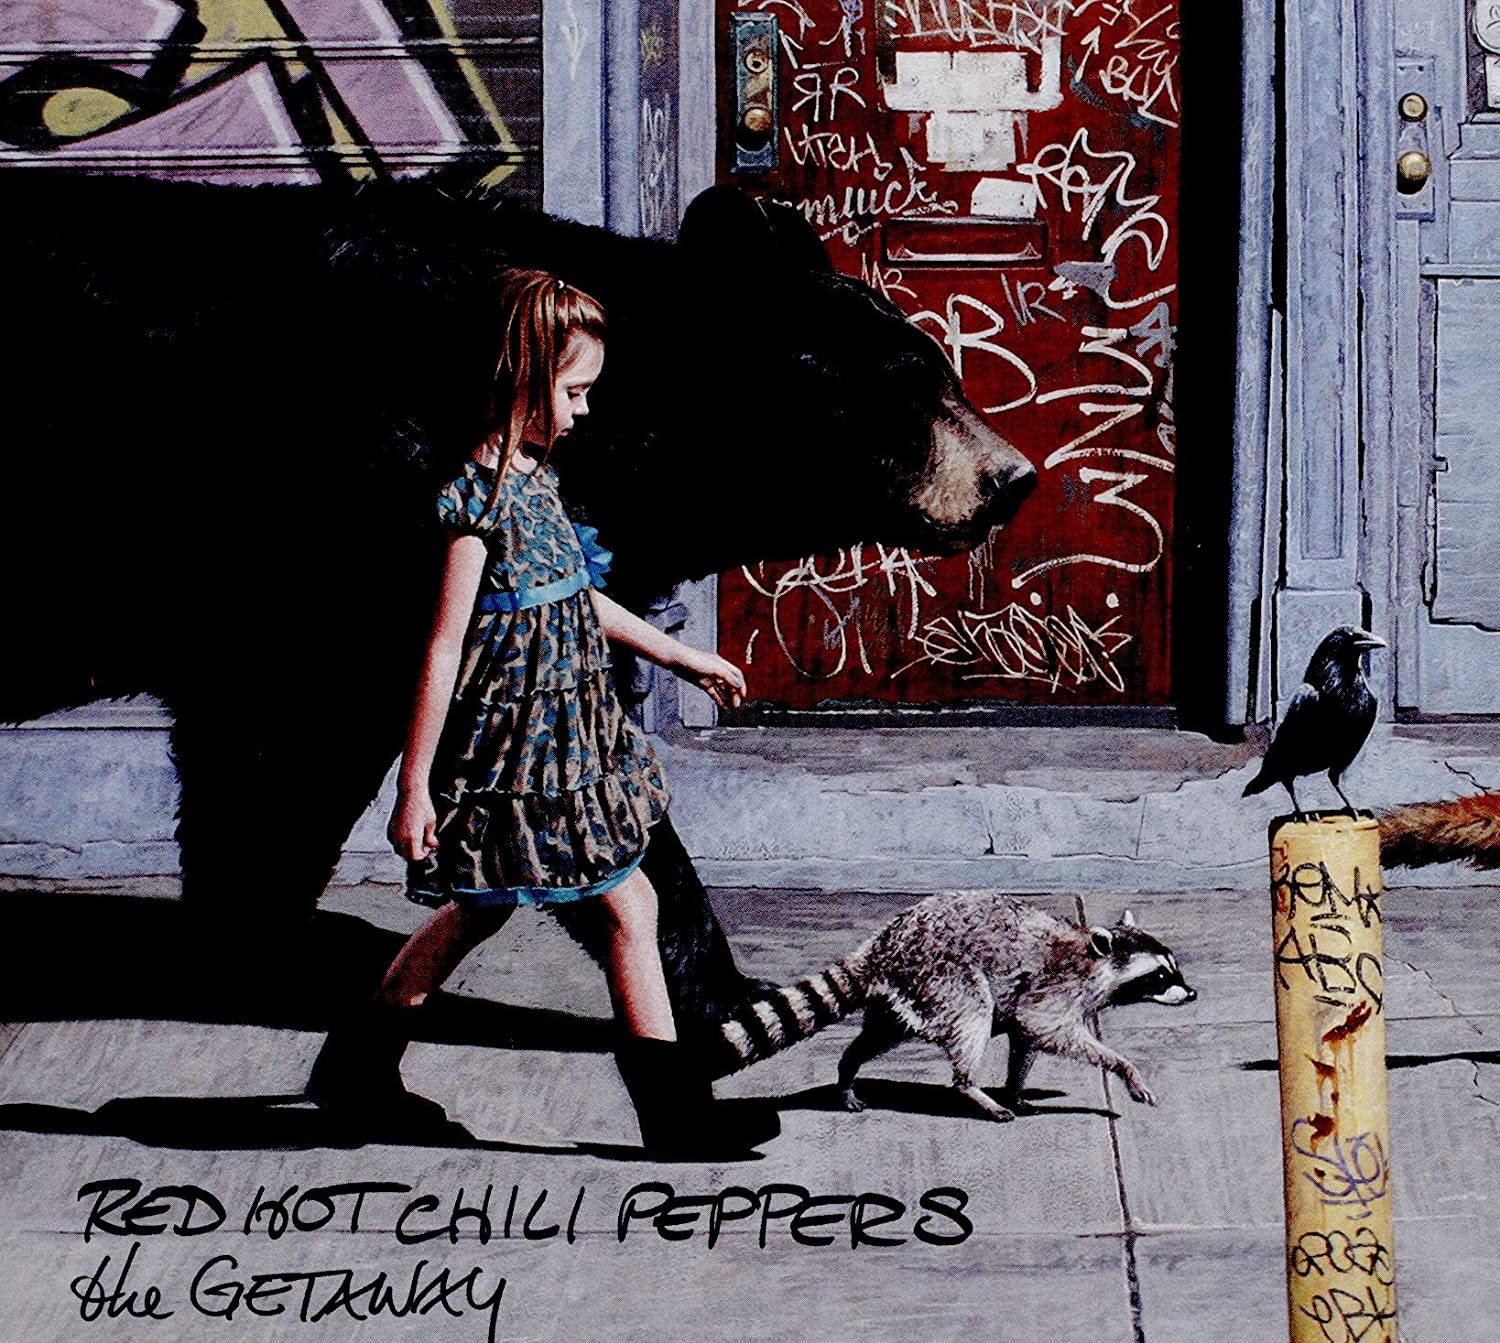 ‘The Getaway’, is the Red Hot Chili Peppers' 11th studio album on Vinyl. The album was produced by Danger Mouse and mixed by Nigel Godrich. 